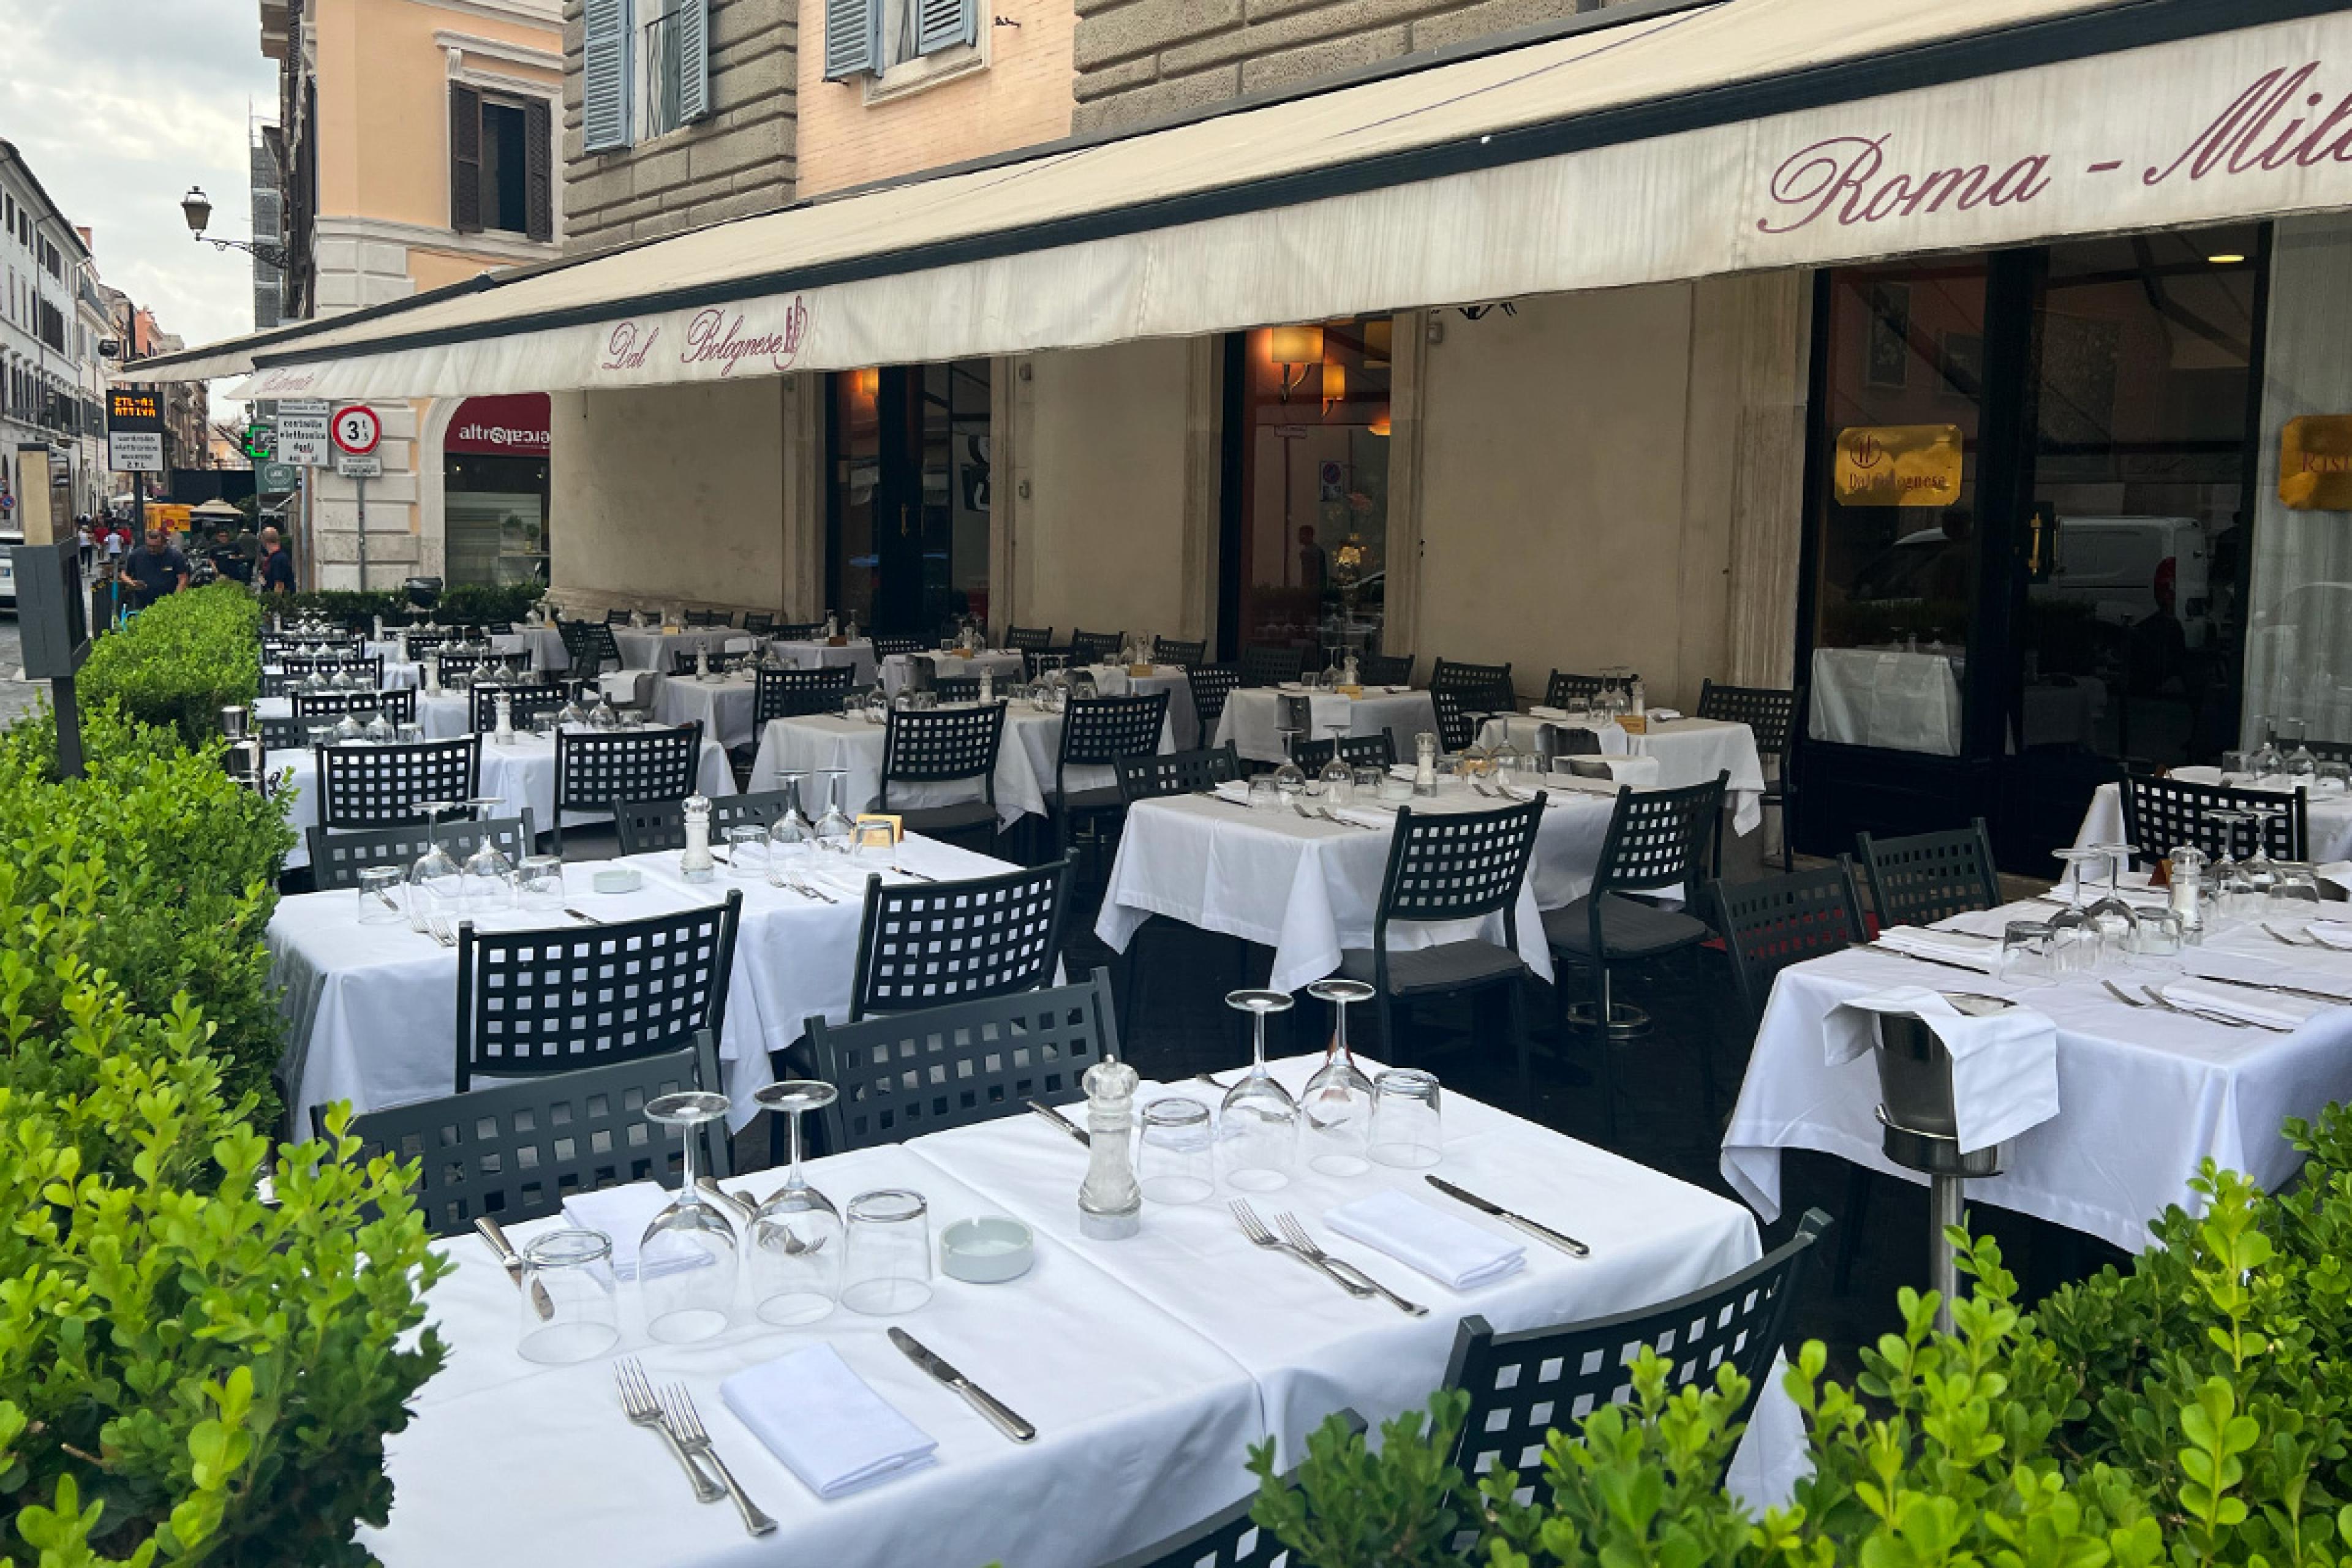 tables with white tablecloths beneath a beige awning